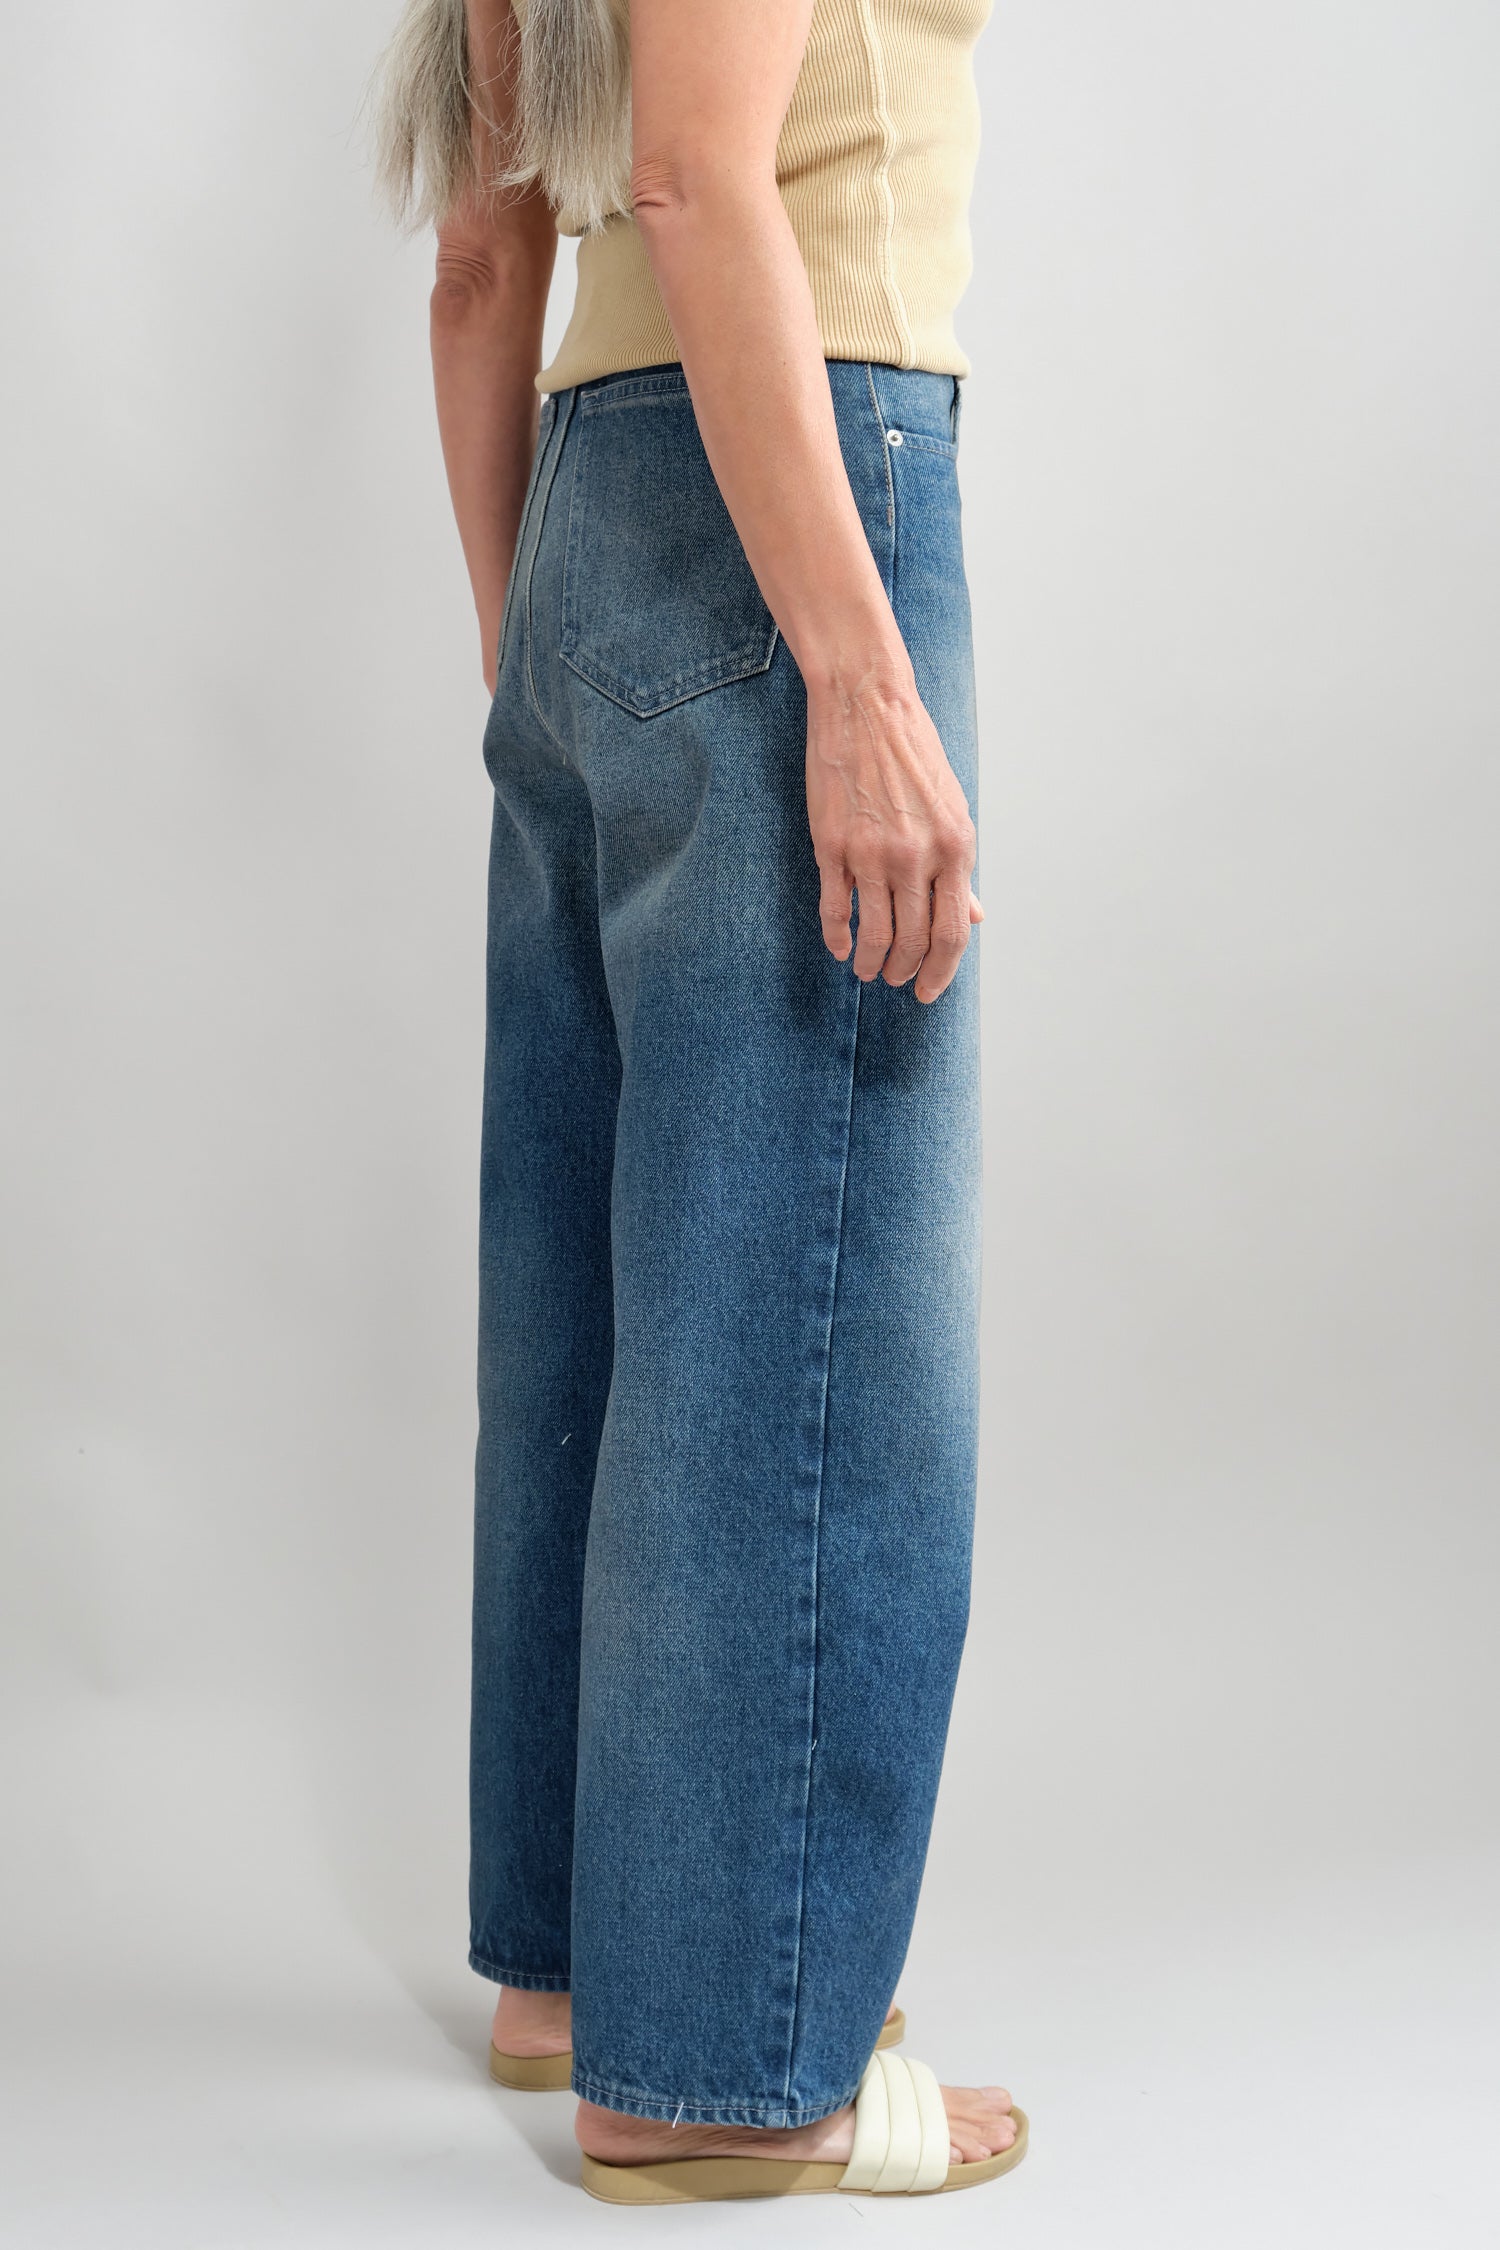 Side of Carrot Jeans in Medium Wash